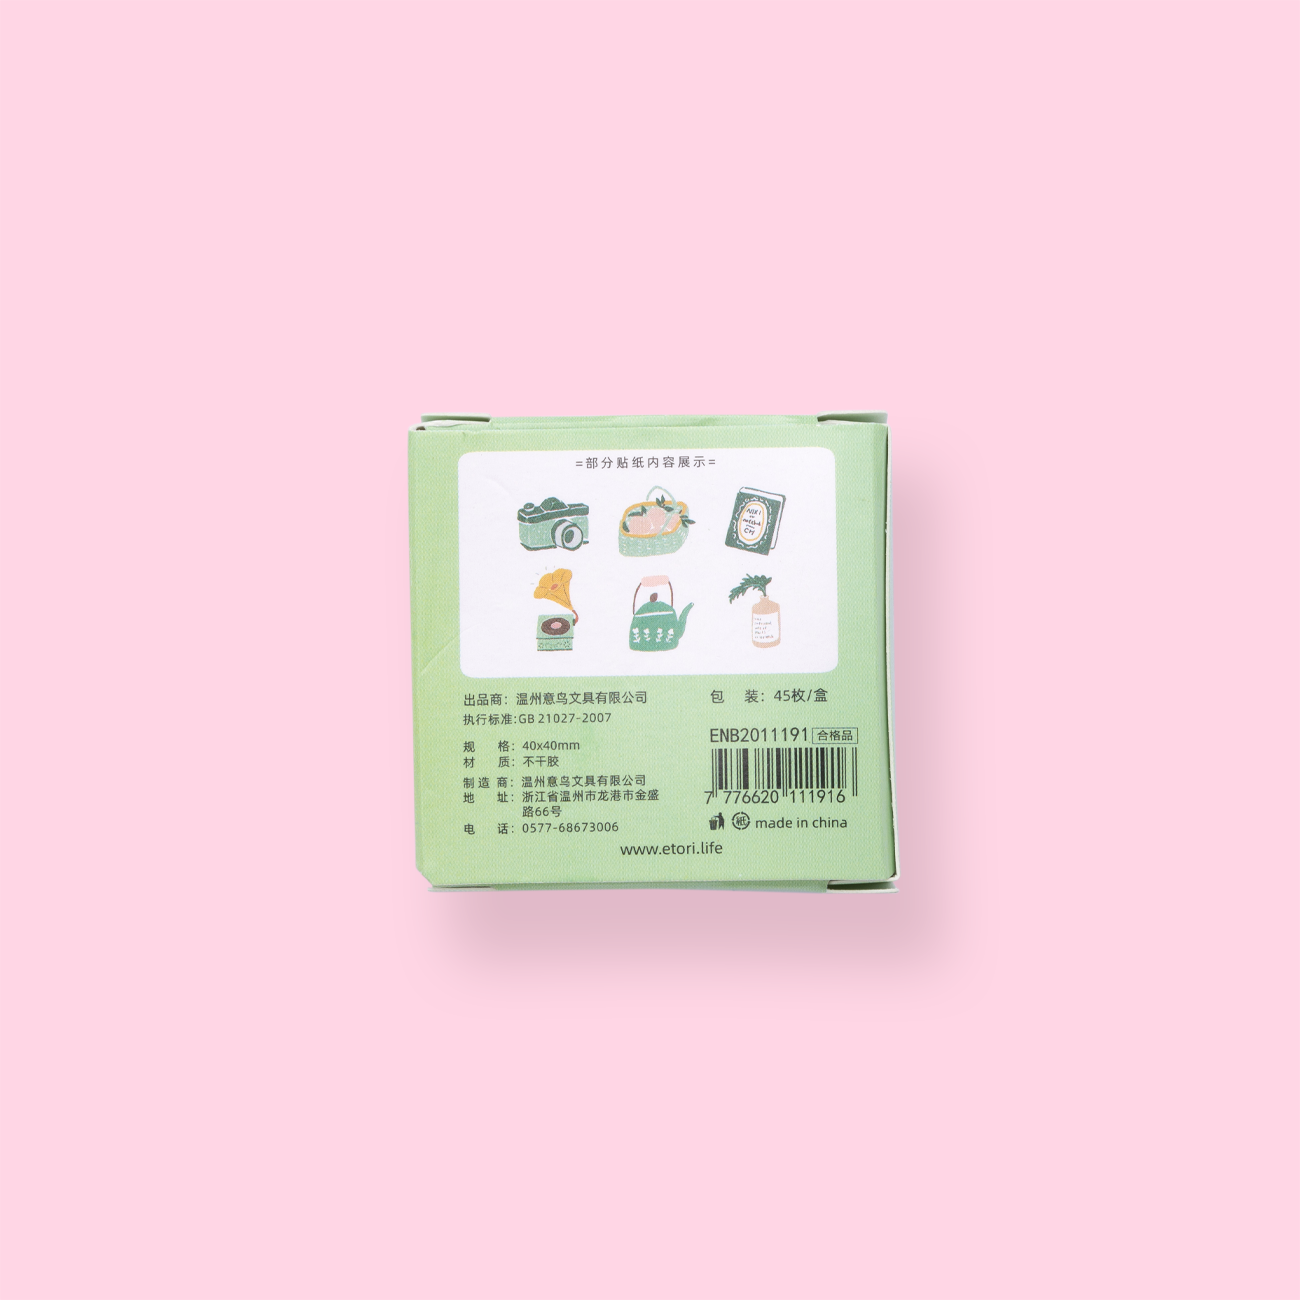 Leisure Holiday Sticker Pack - Stationery Pal